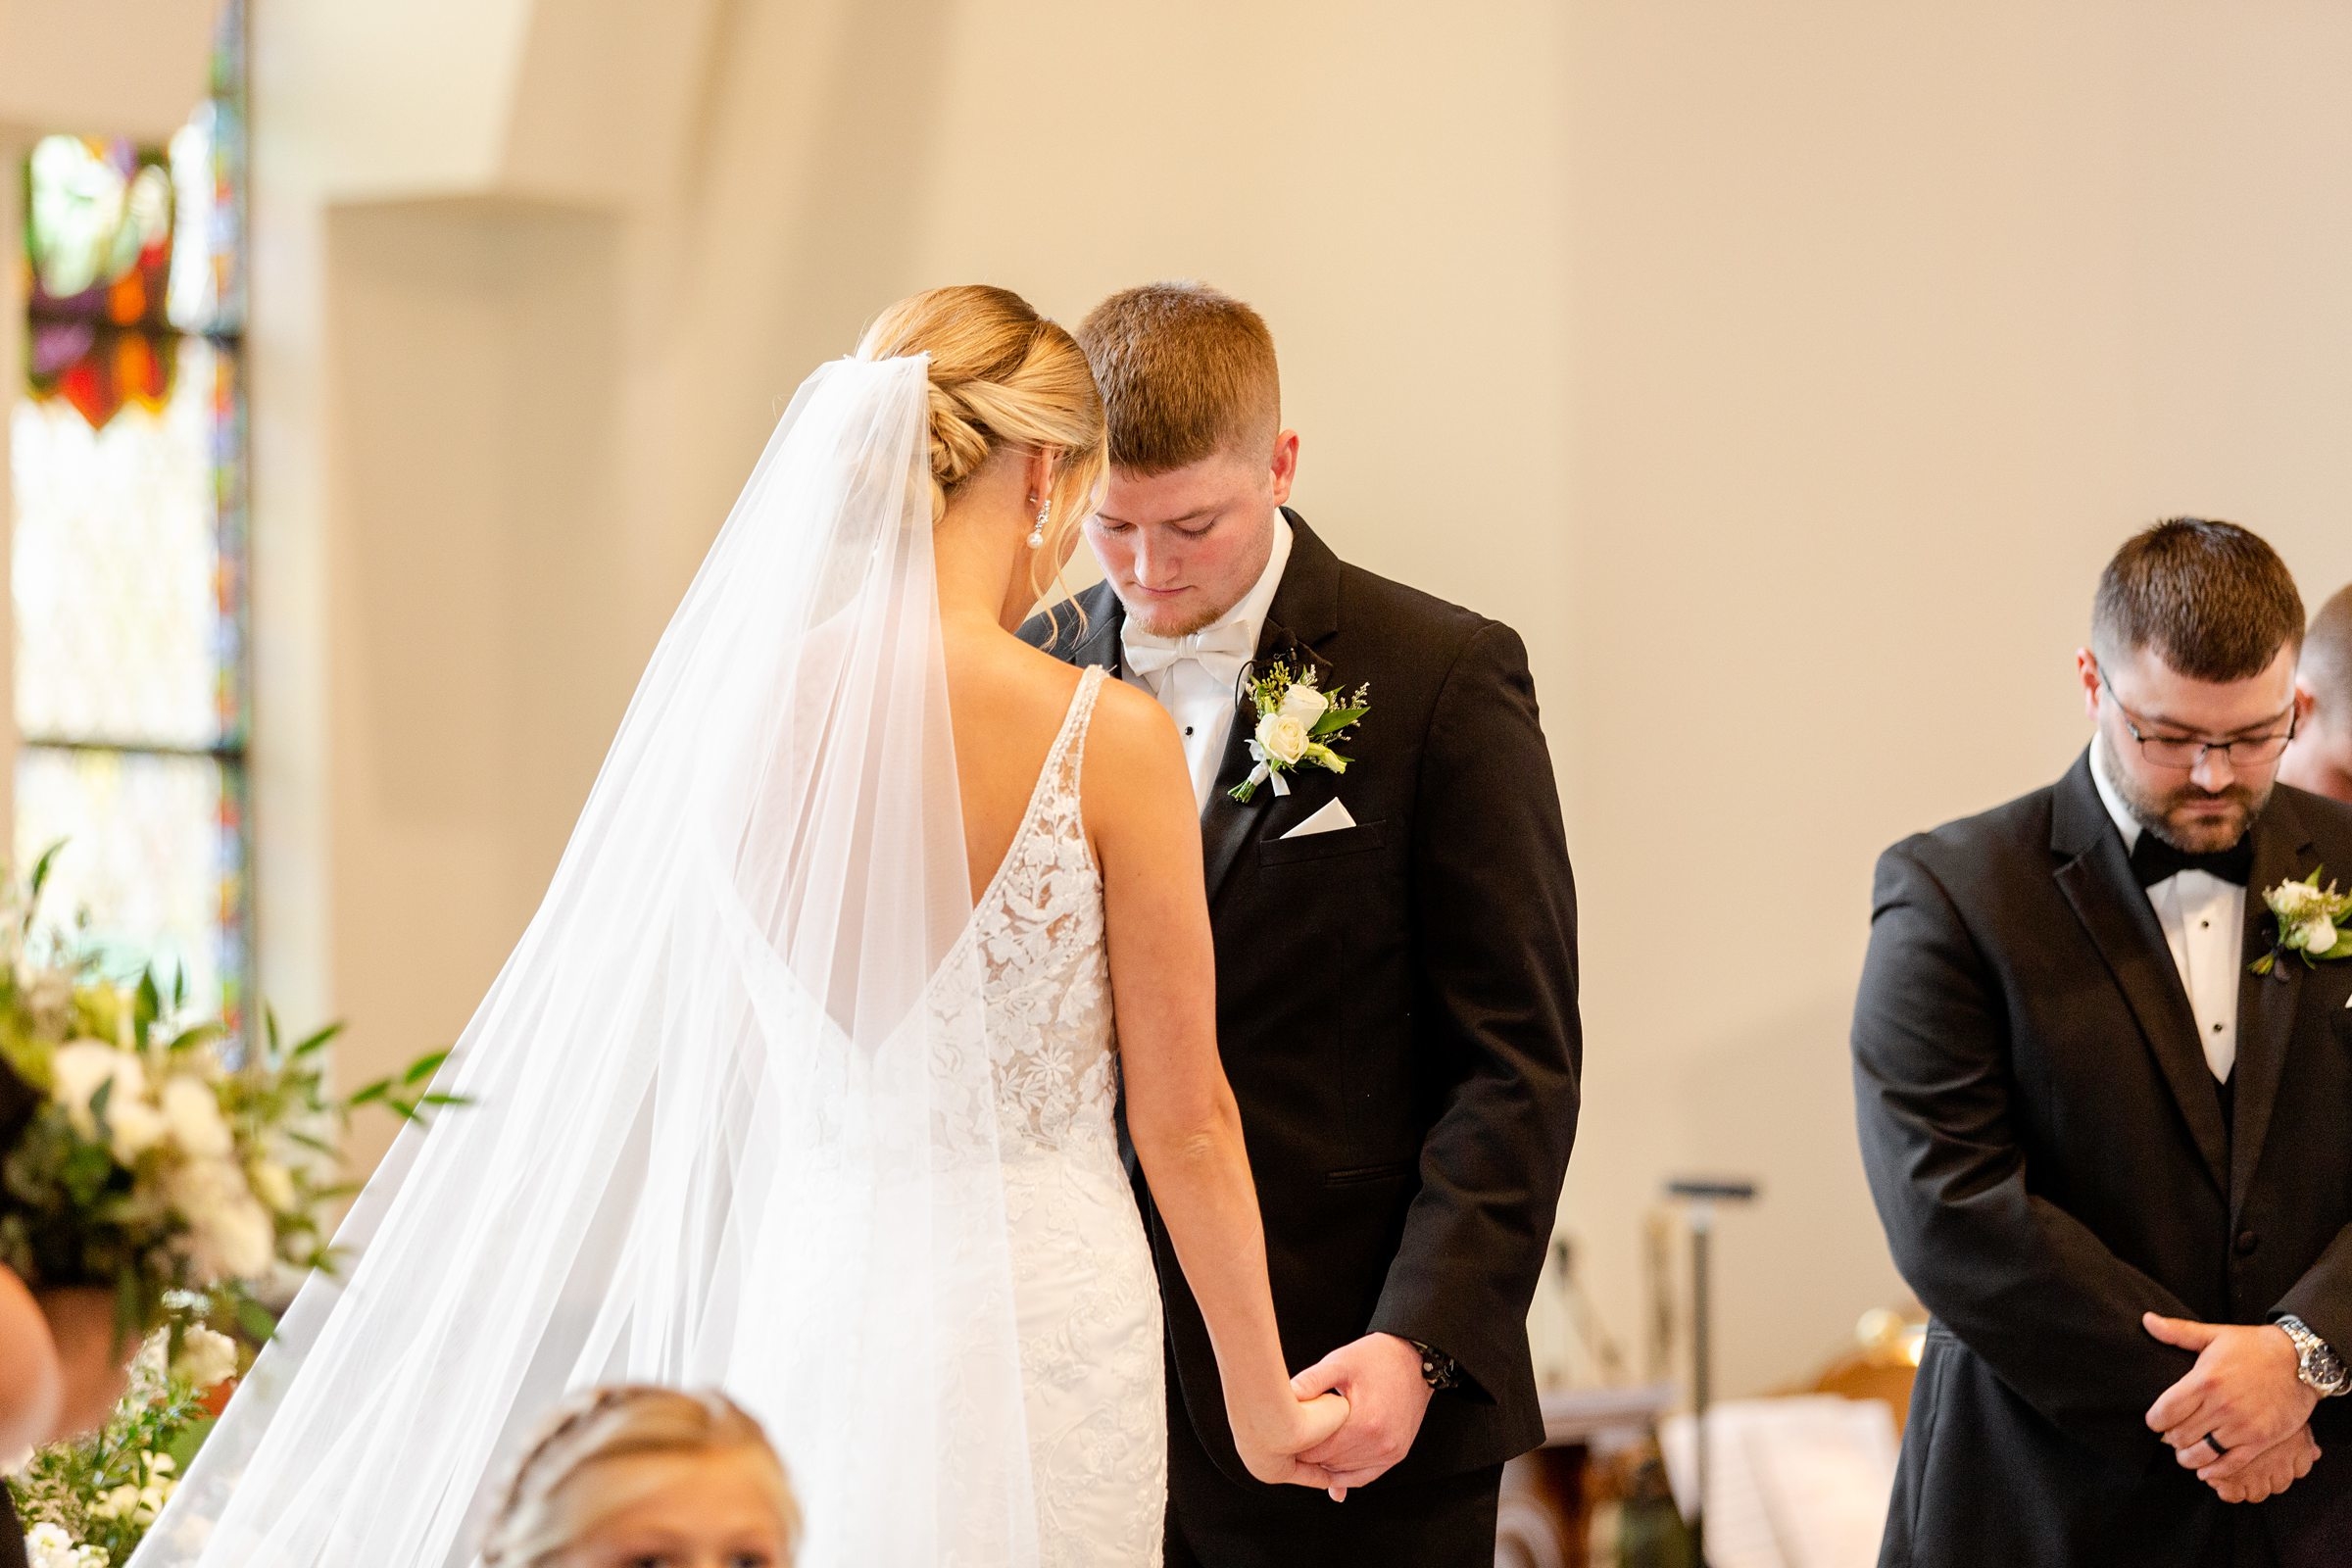 Hannah and Cody's Wedding in Booneville, IN141.jpg